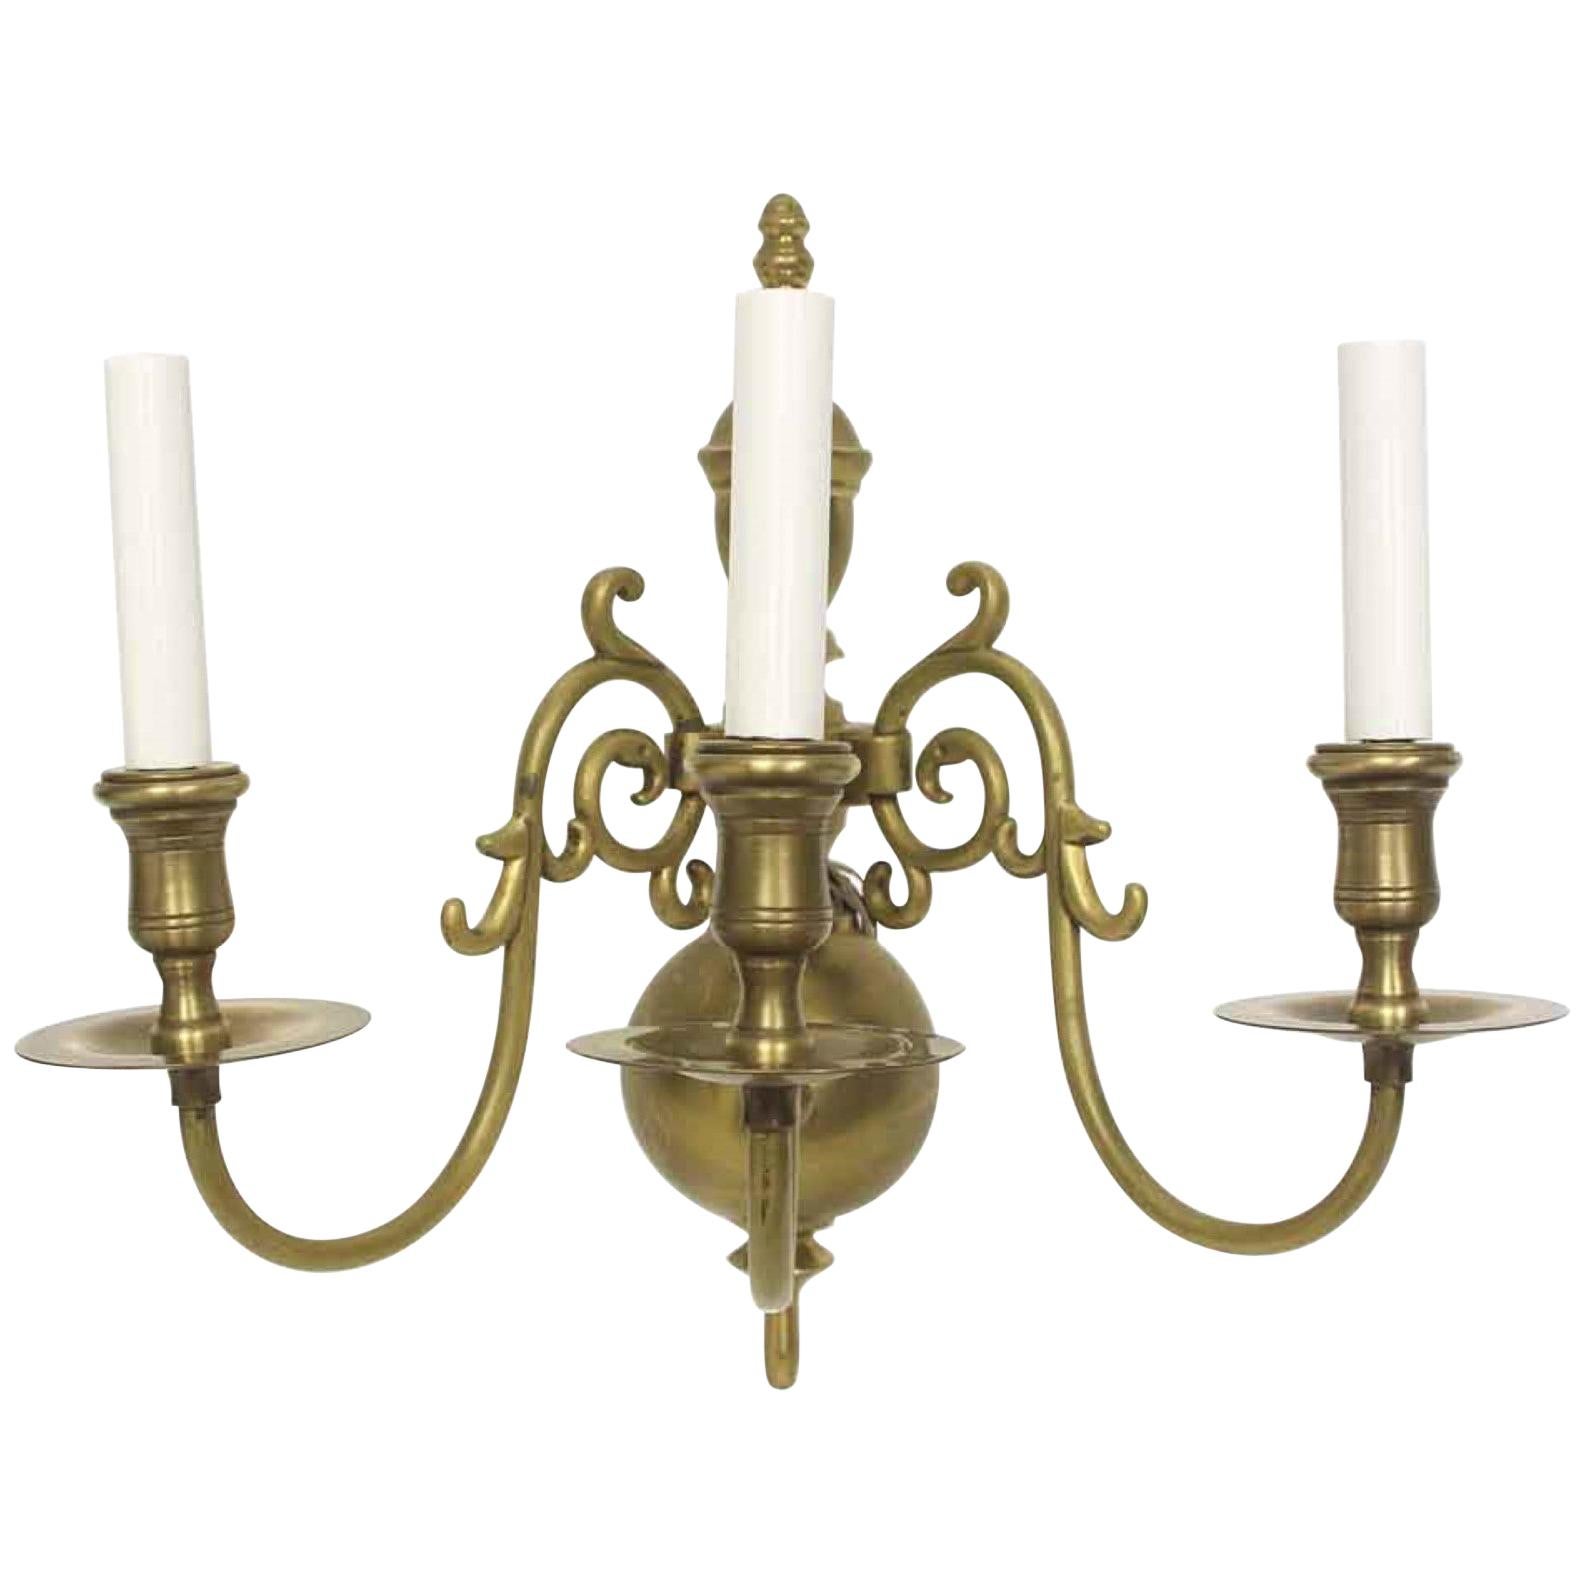 1970s Williamsburg Cast Brass Single Wall Sconce Single 3-Arms